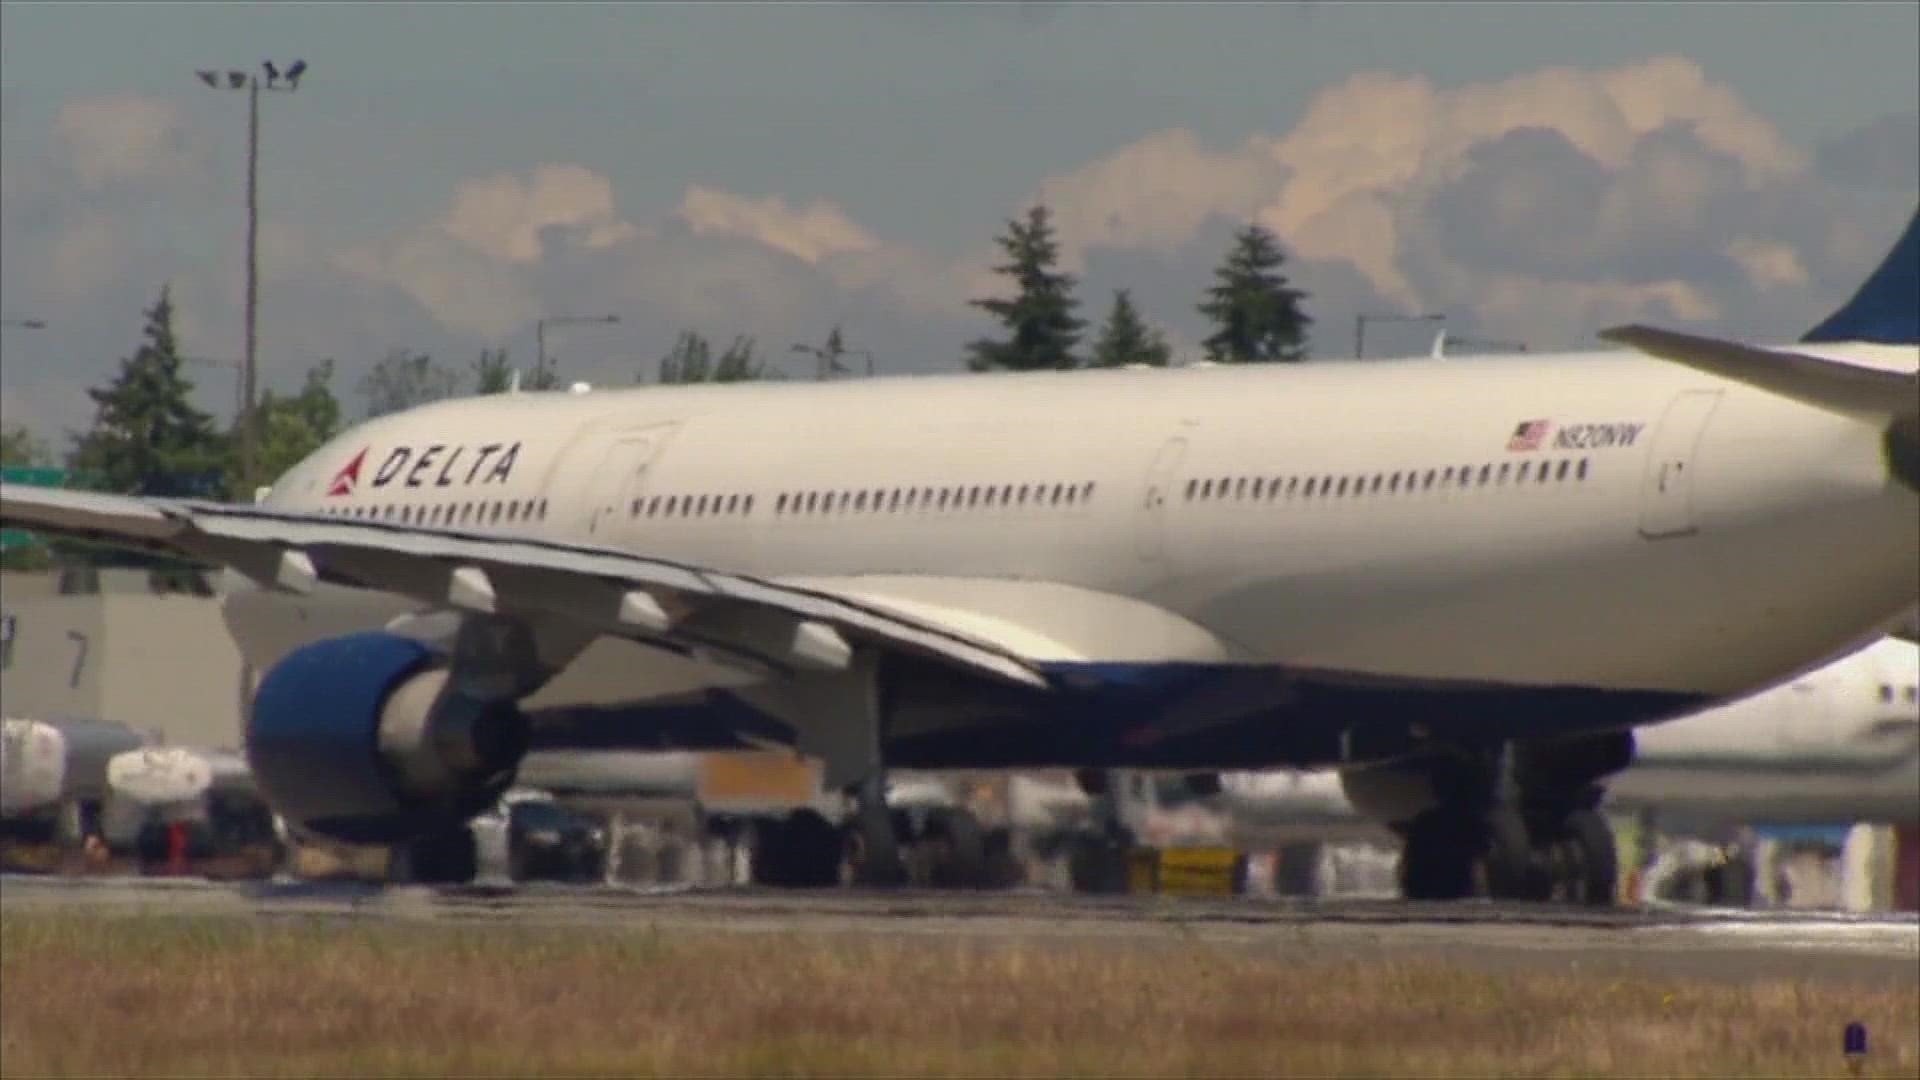 Sea-Tac is on track to exceed its capacity by 2050, prompting state lawmakers to look for a new location for a commercial airport.